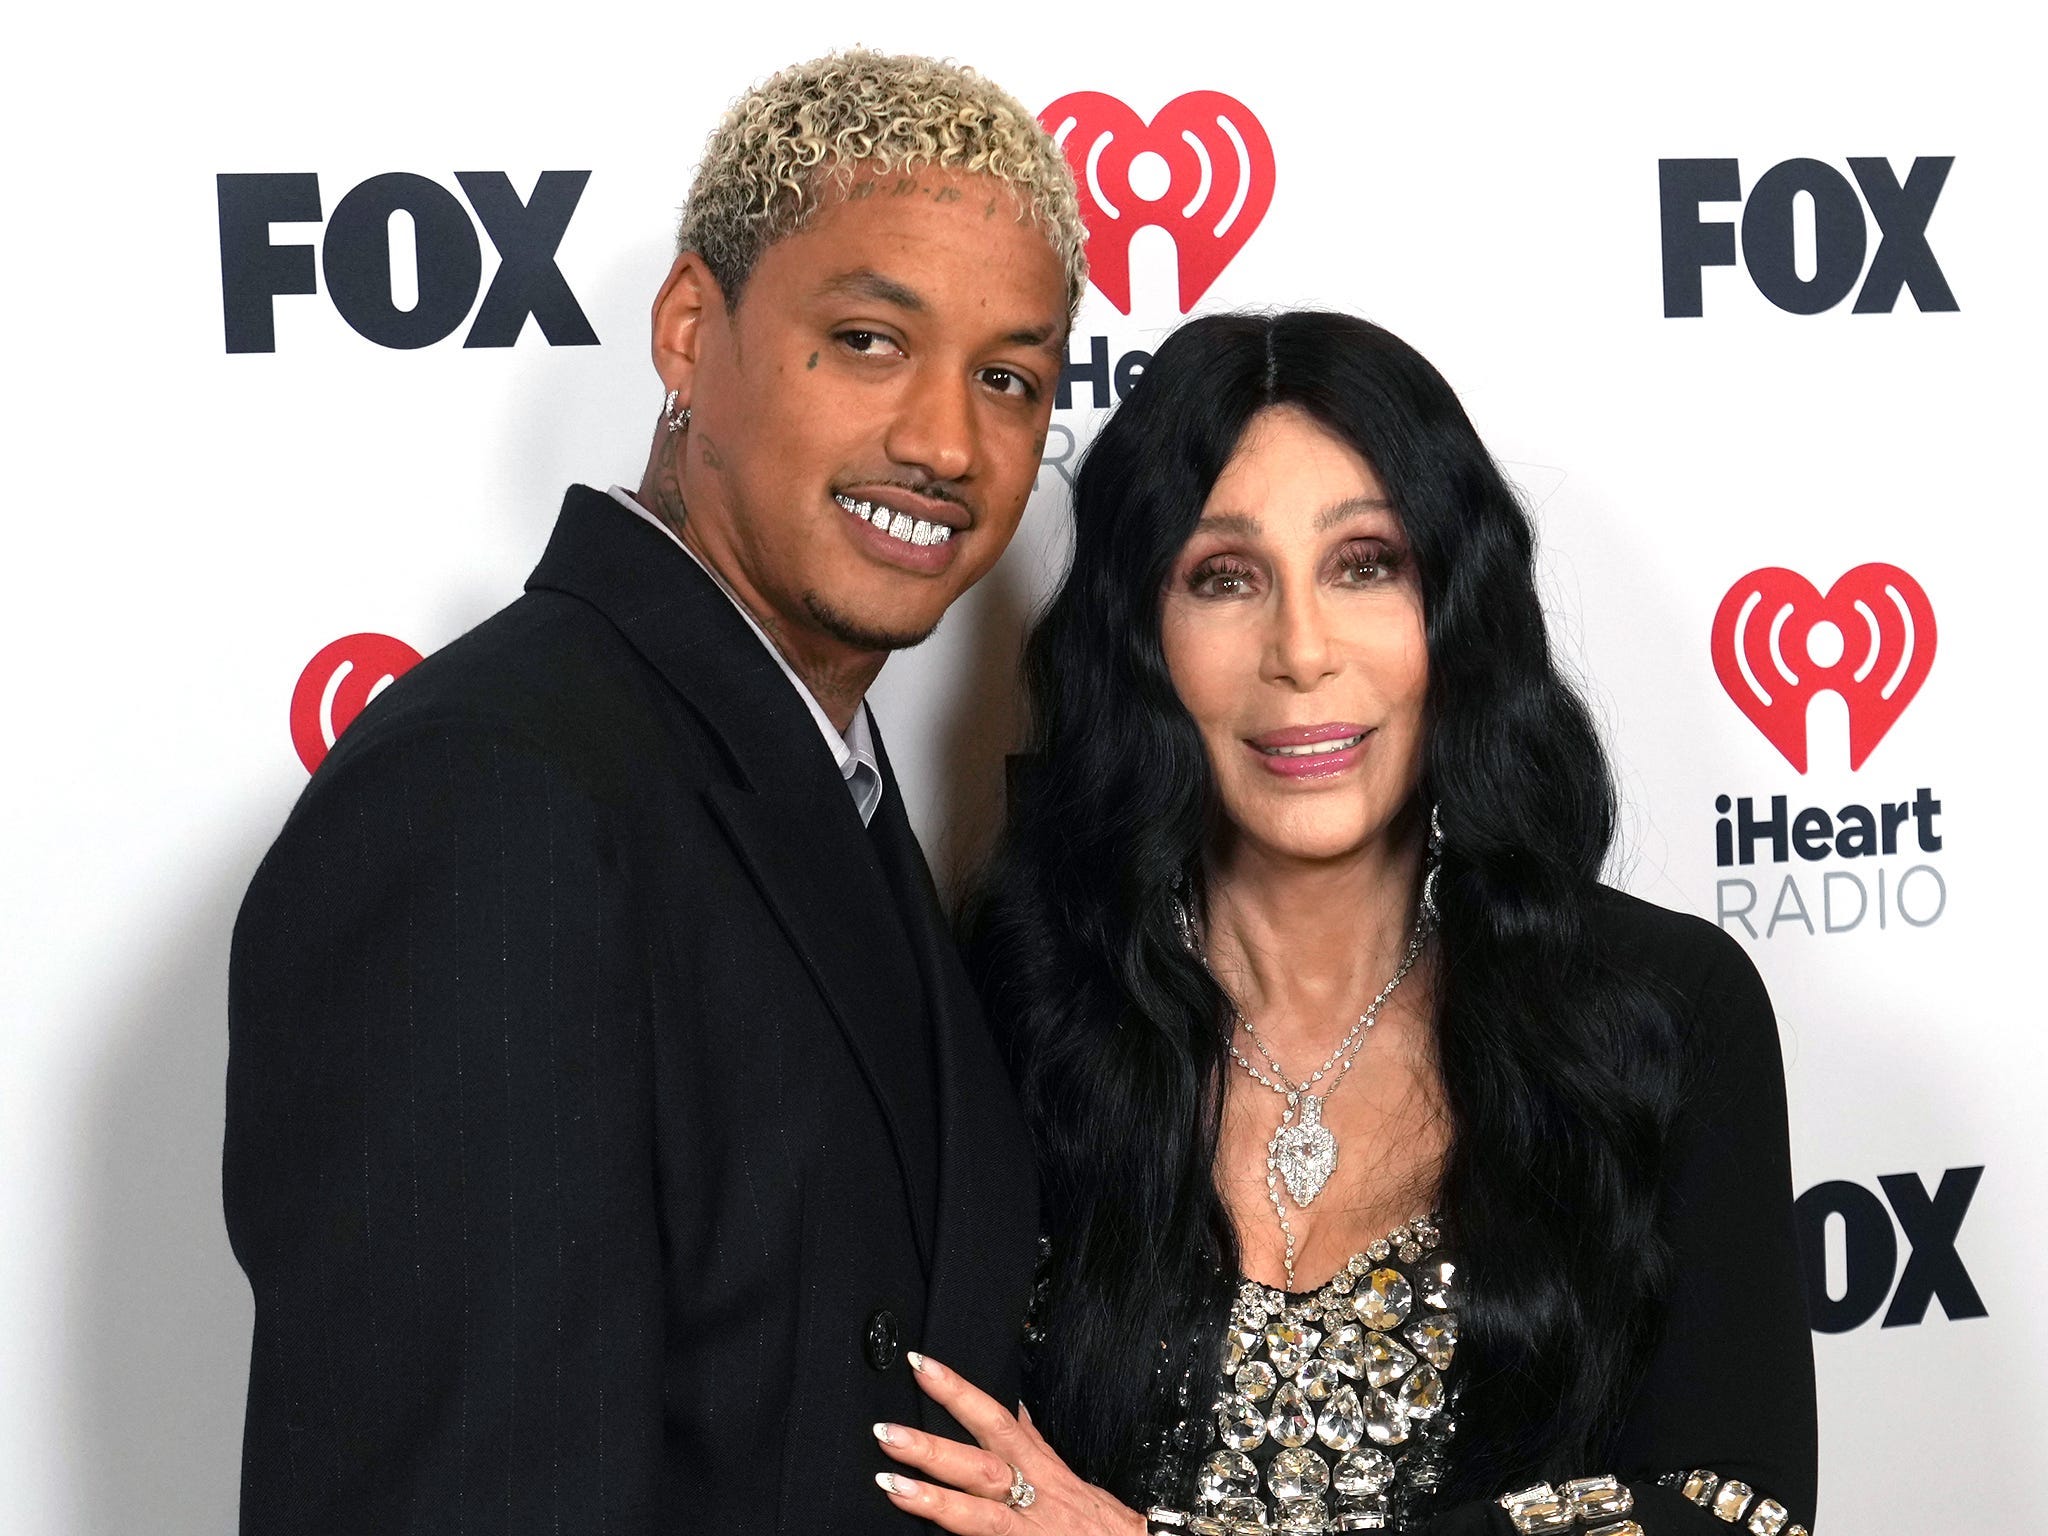 Cher says she dates younger men because older men were too 'terrified' to approach her